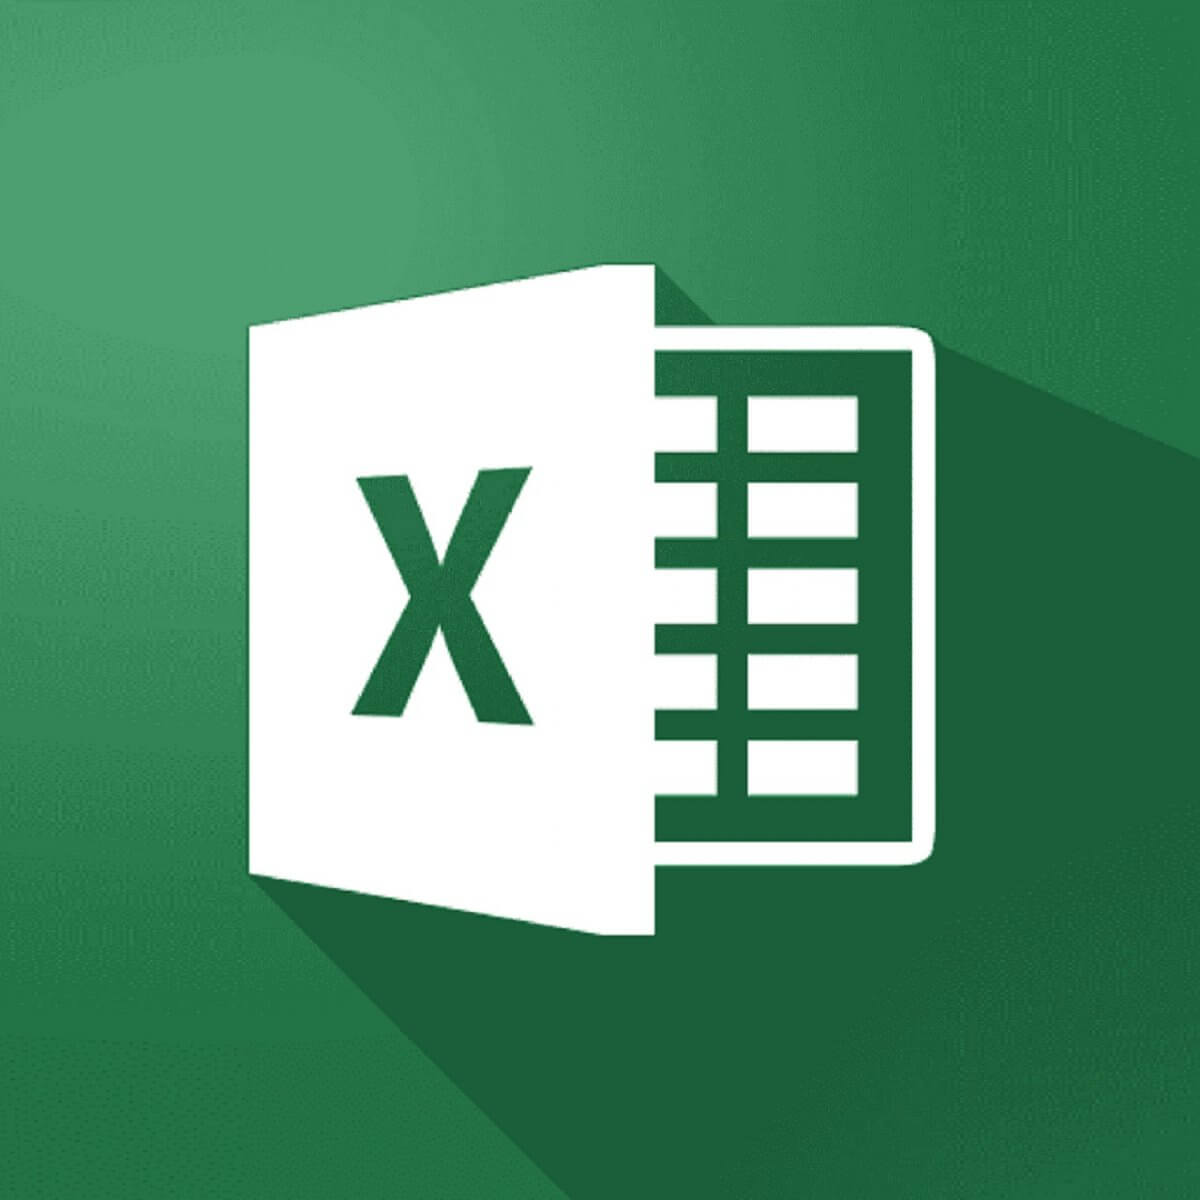 how to delete certain rows in excel at once